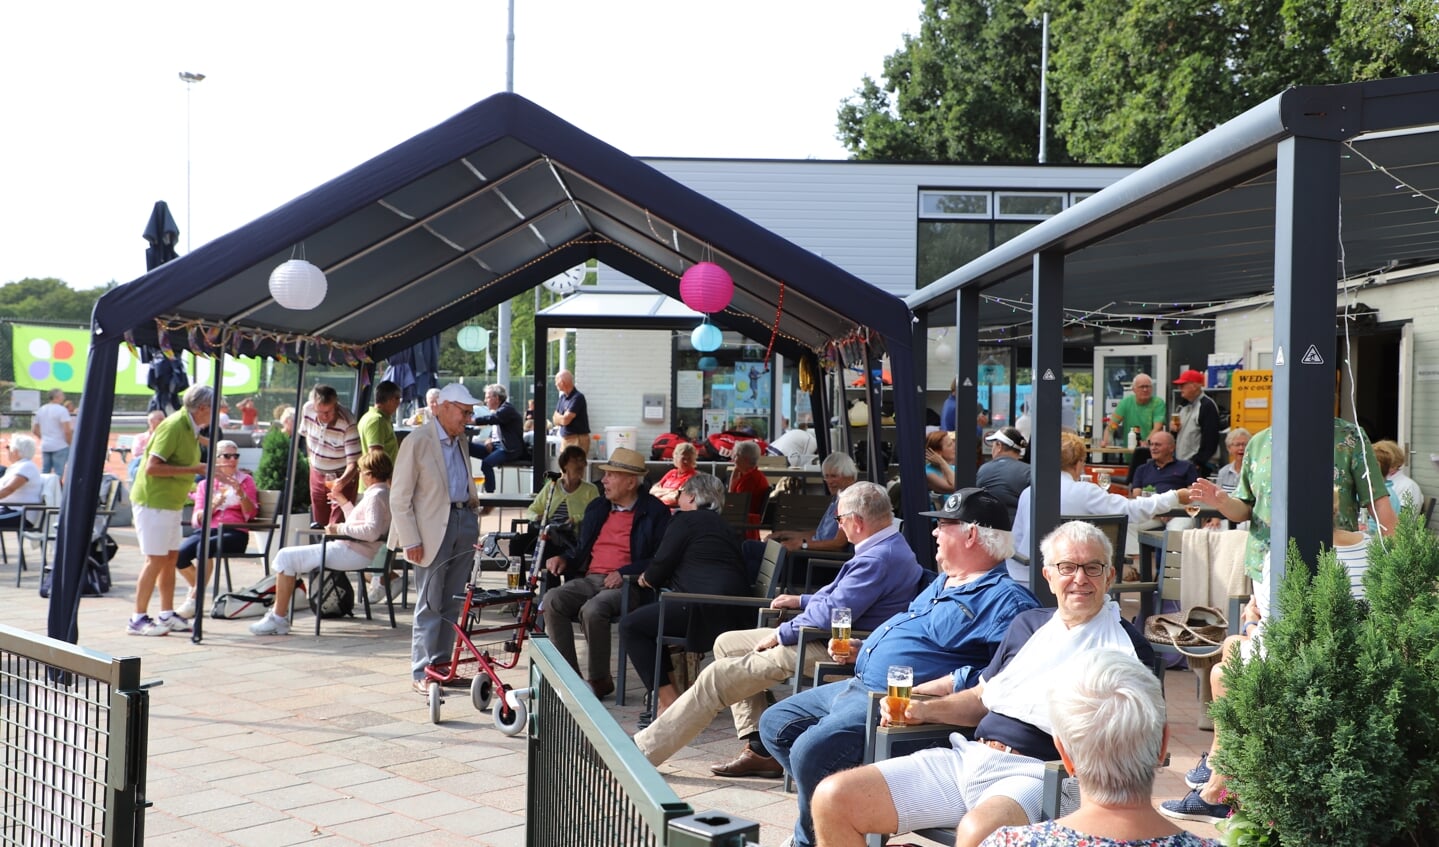 60-plus toernooi in sfeervolle ambiance. 